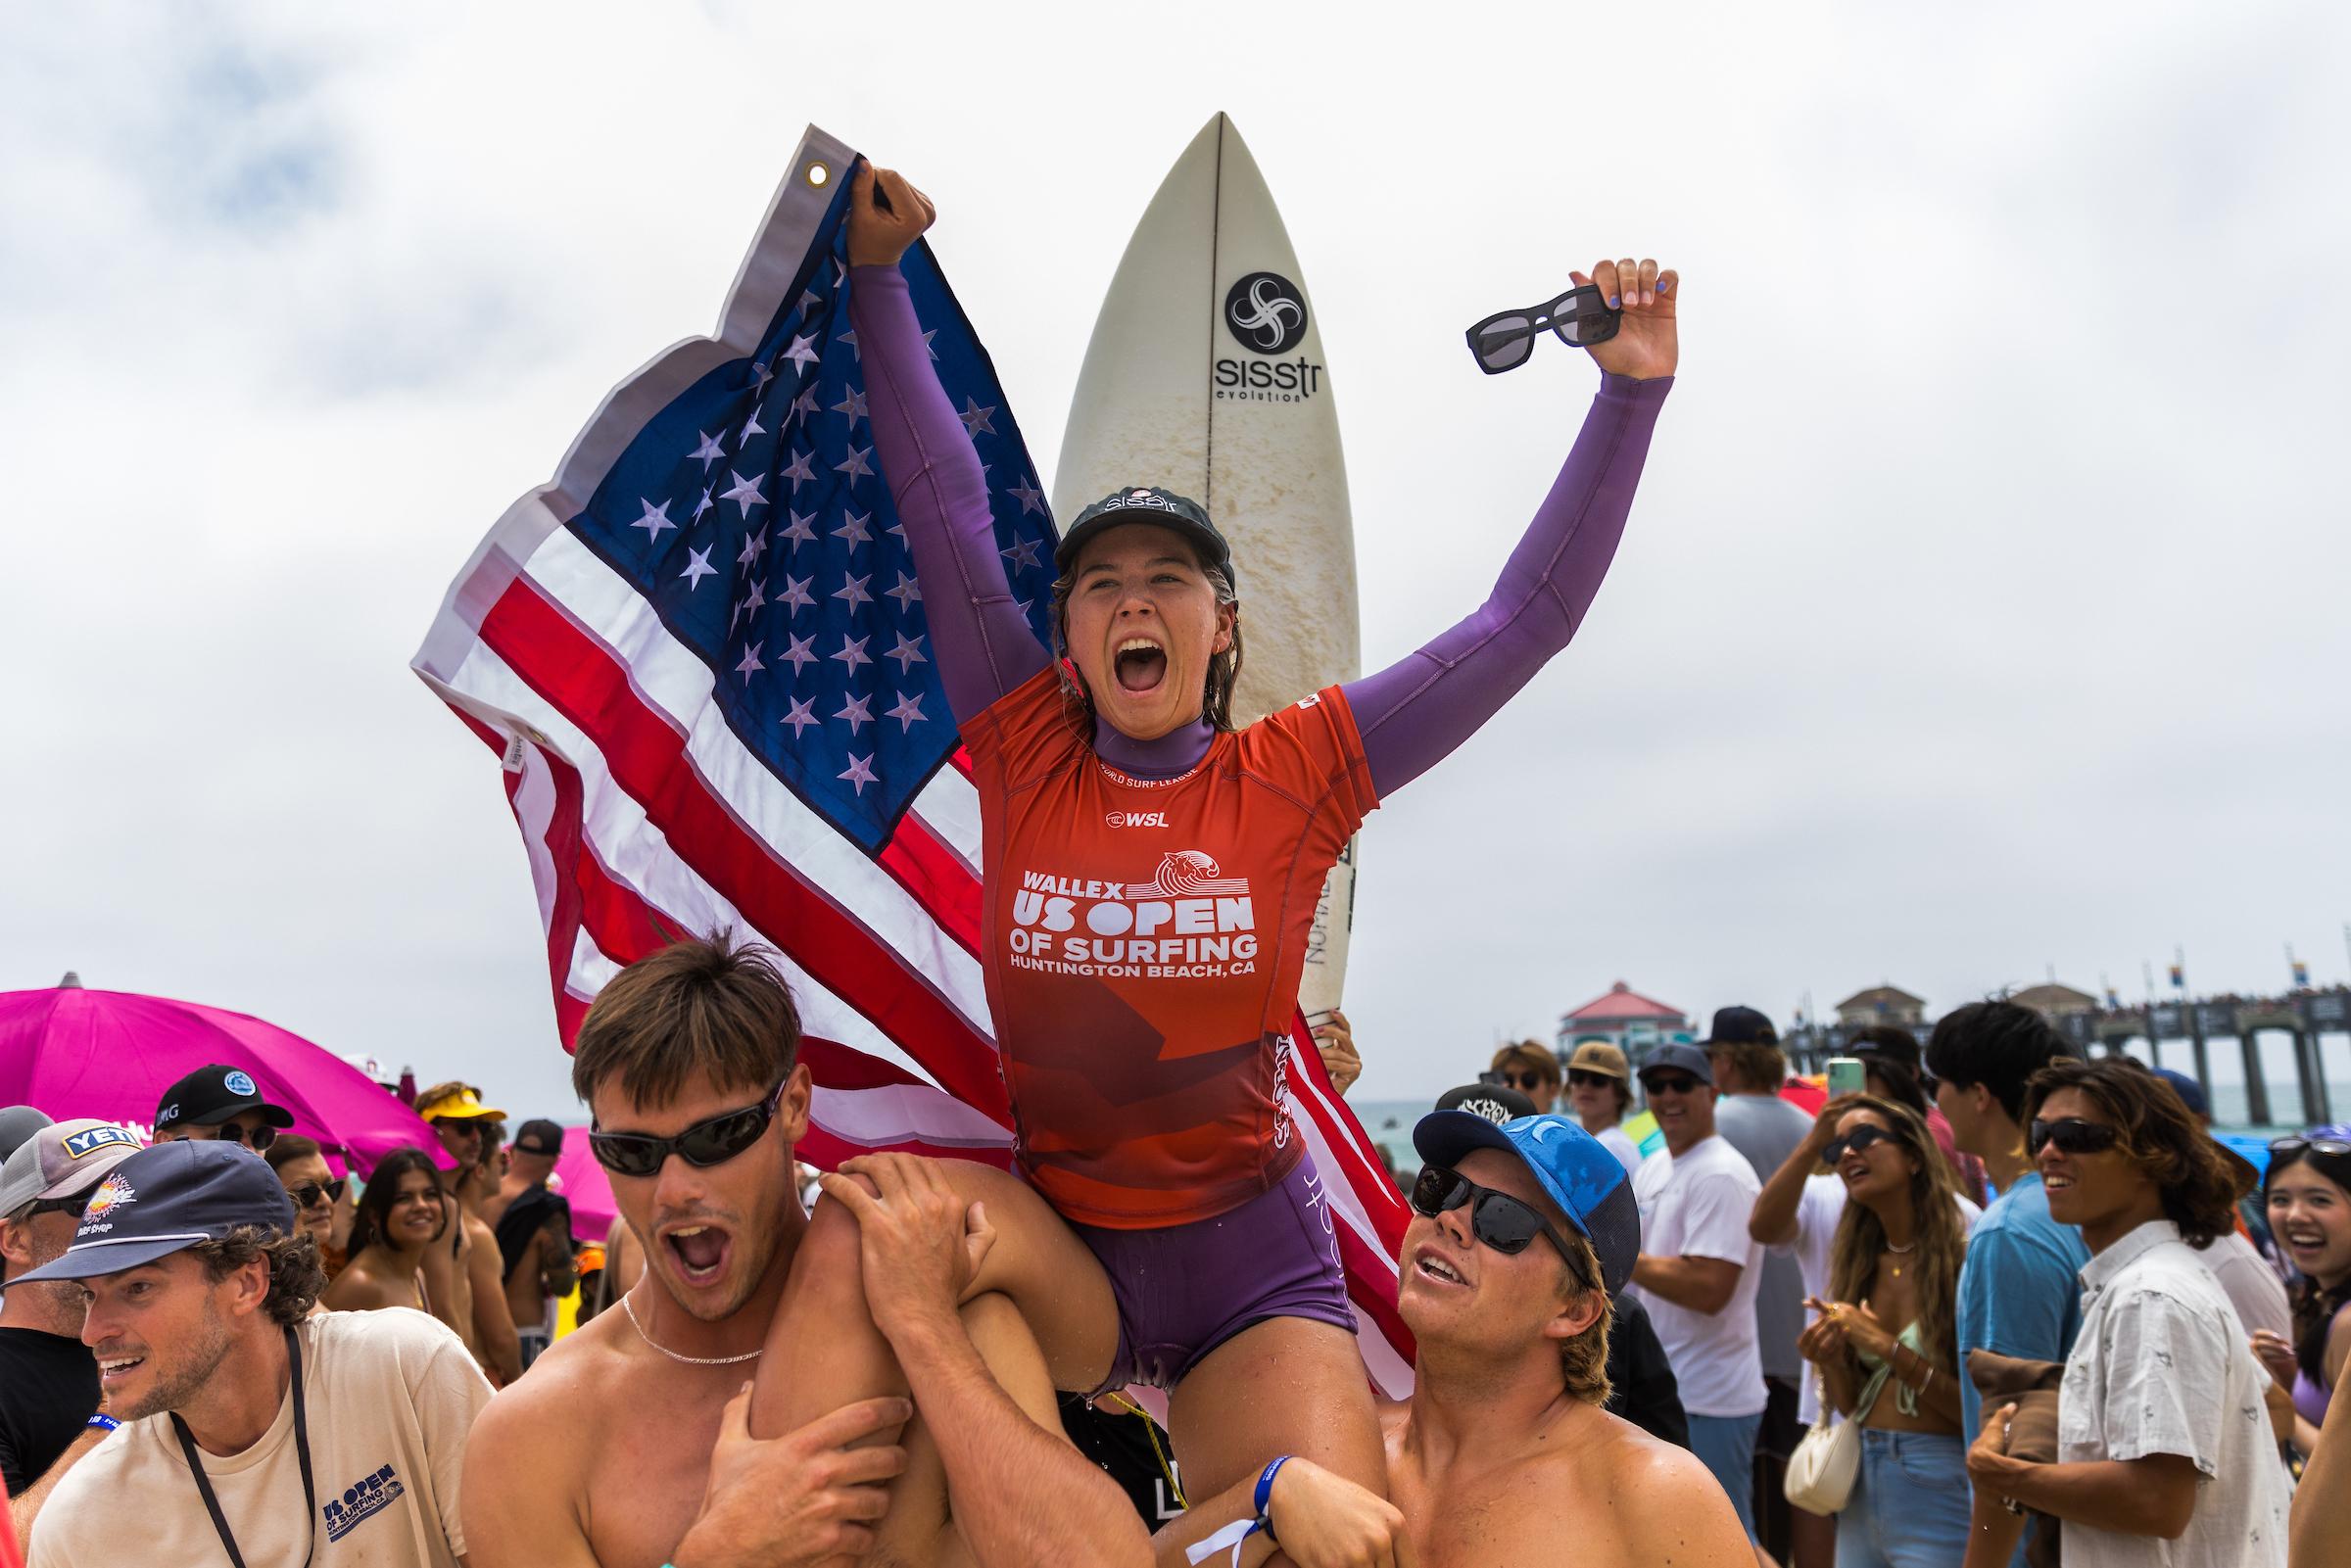 San Clemente Teen Surfer and 3 Others Win US Open of Surfing